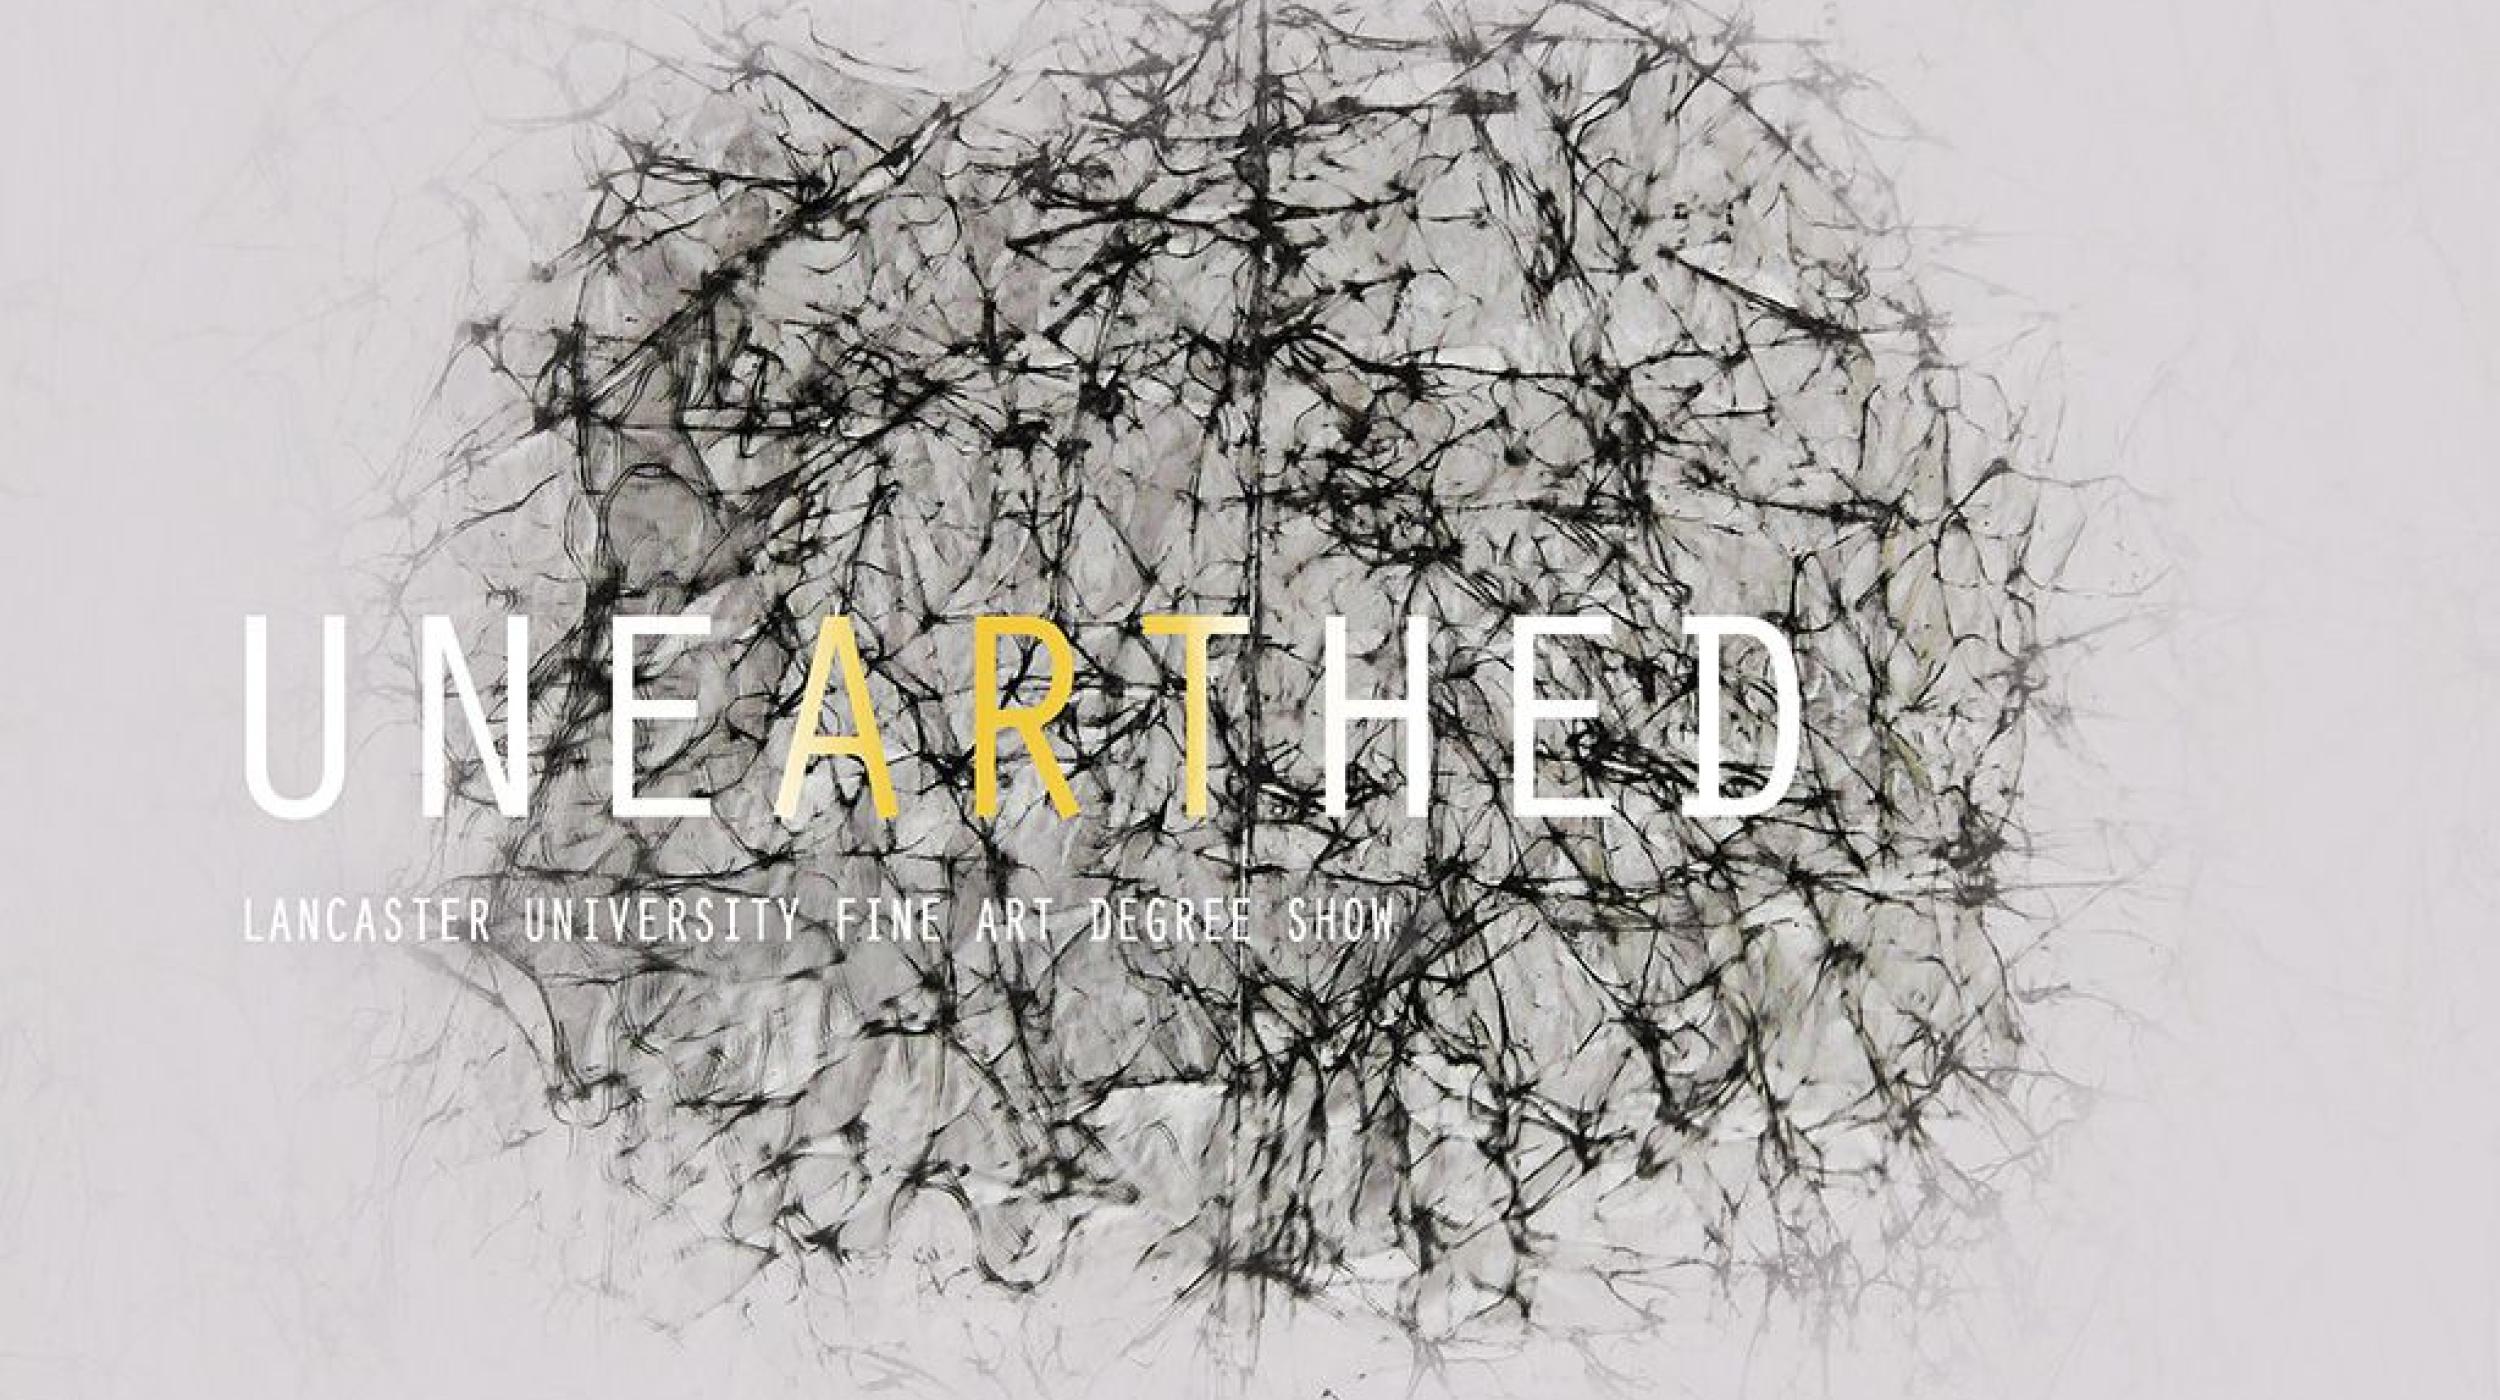 Unearthed: Fine Art Degree Show 2015